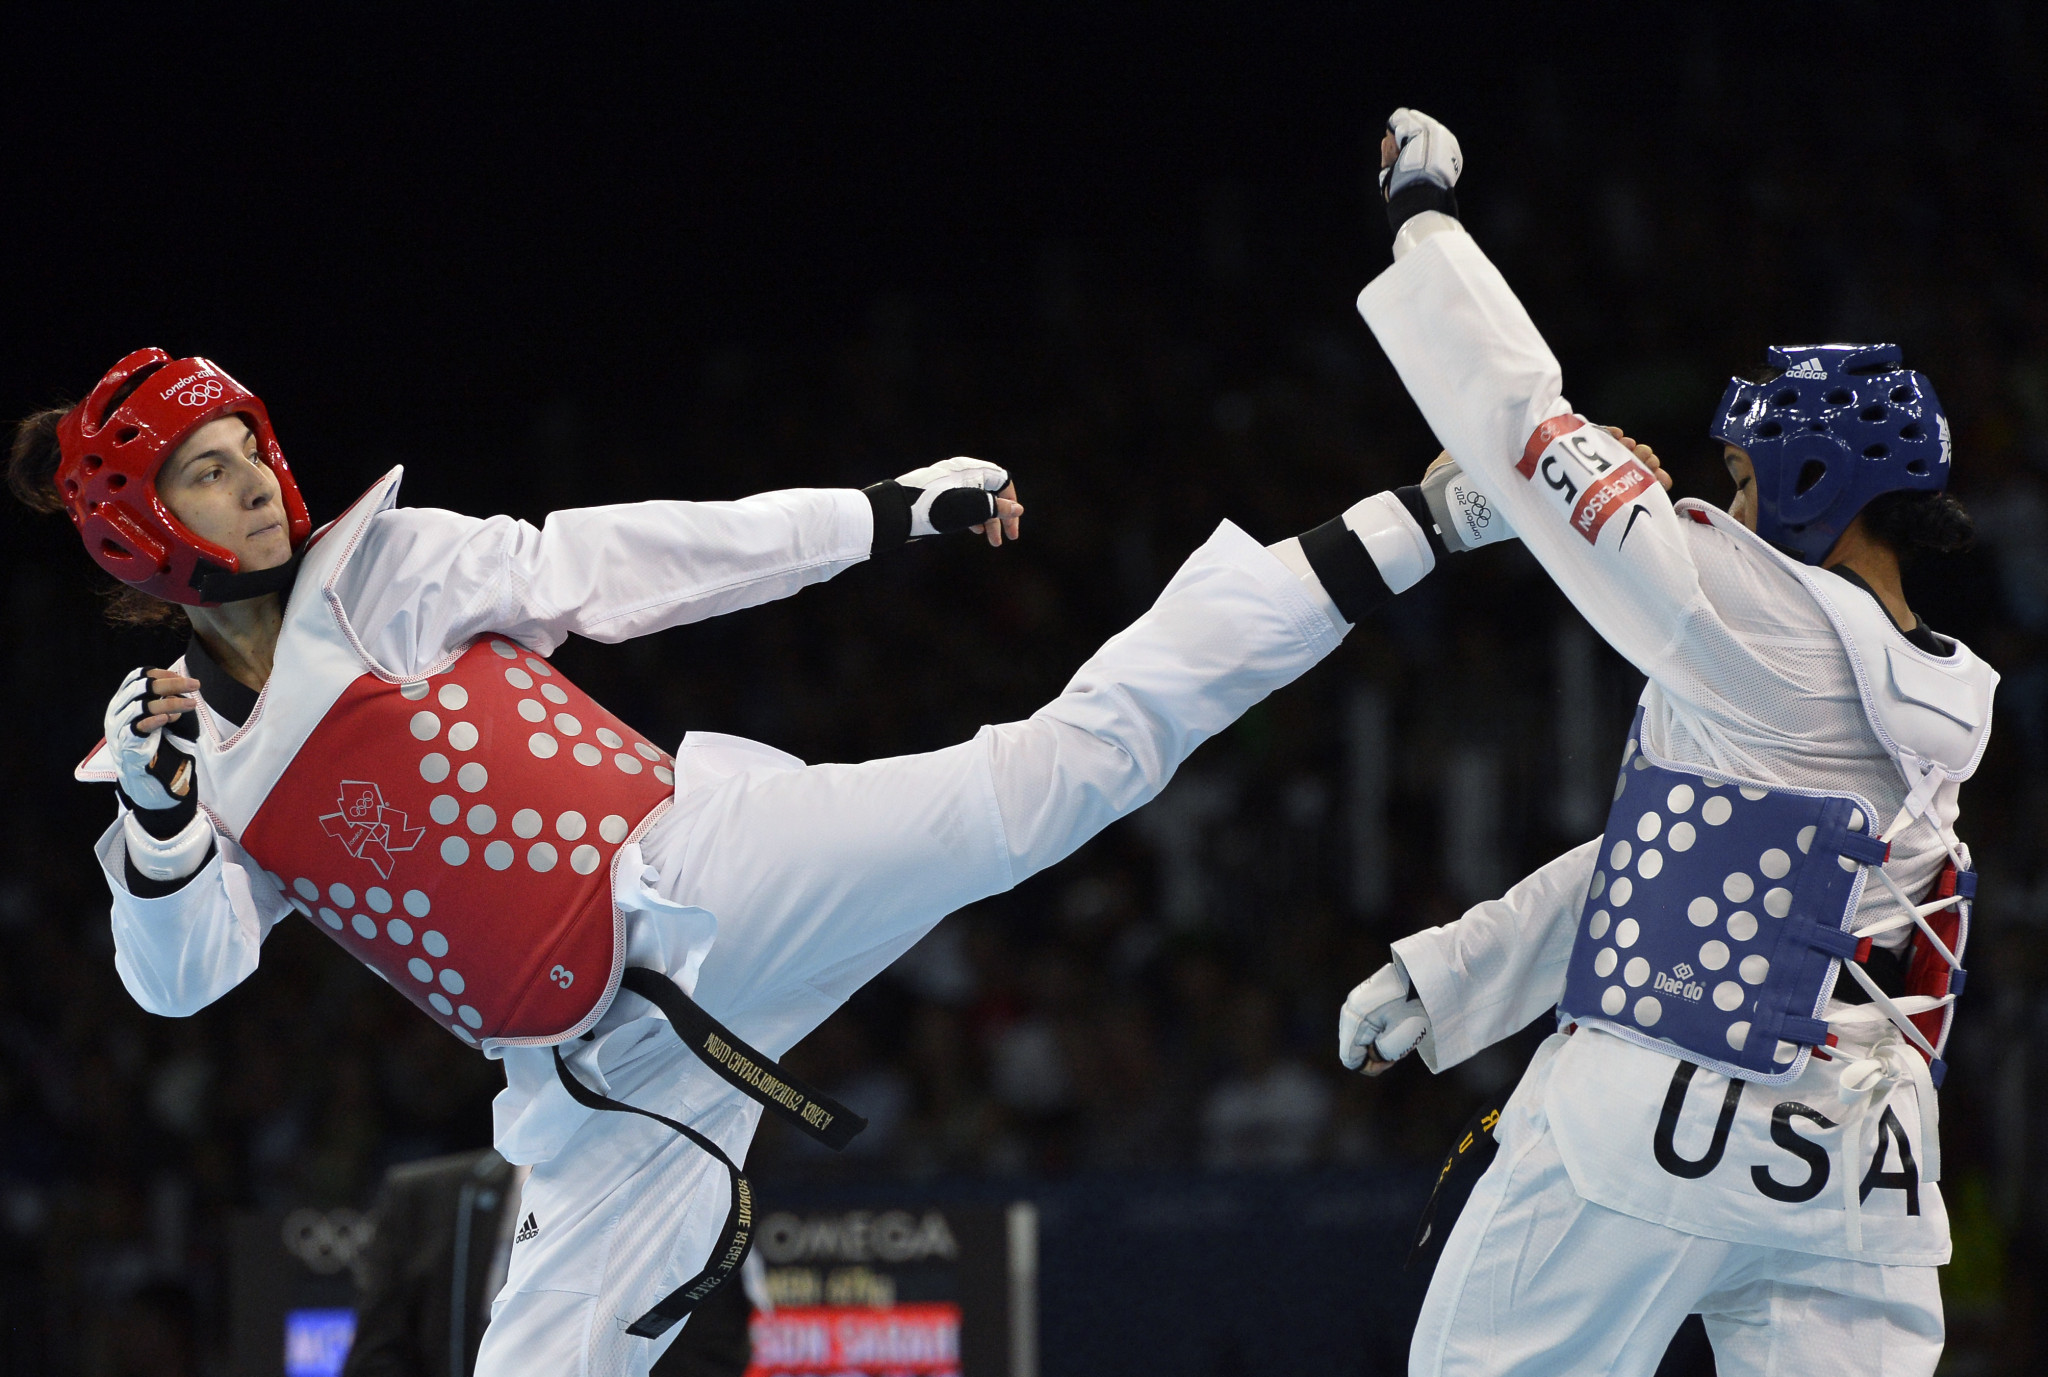 Beijing 2008 medallist Stevenson steps away from coaching role to concentrate on Presidency of British Taekwondo